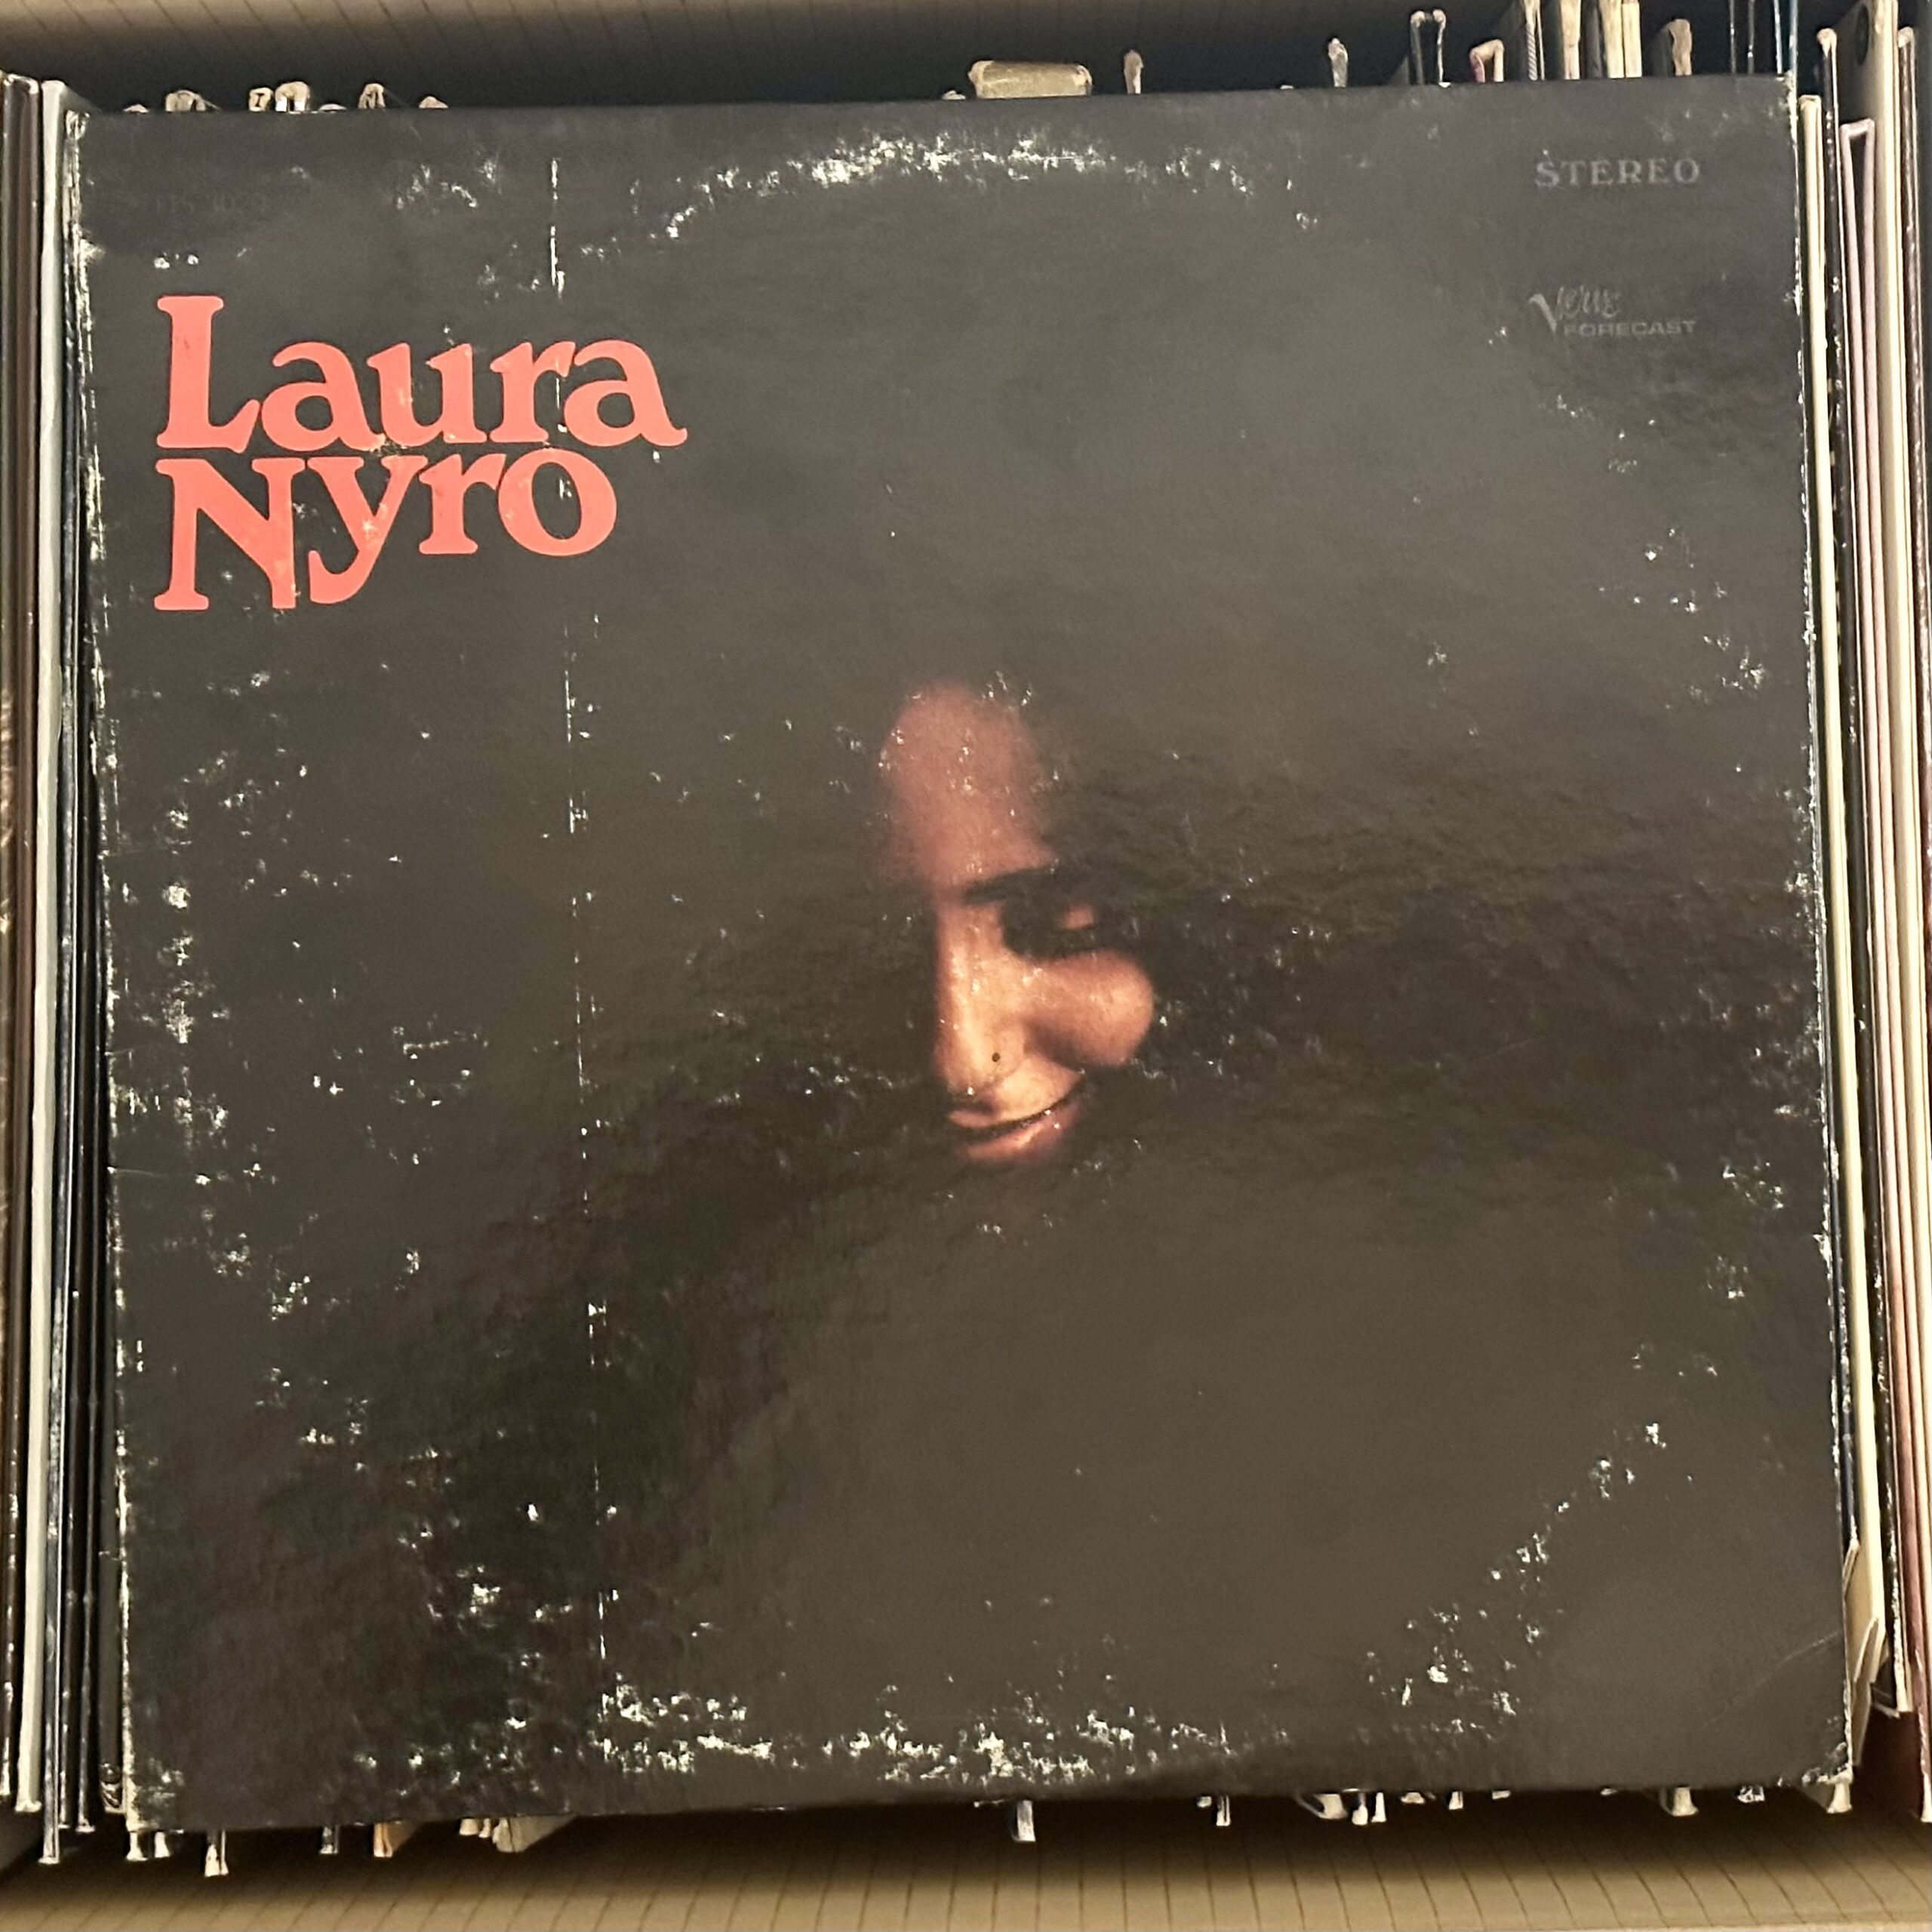 The First Songs by Laura Nyro